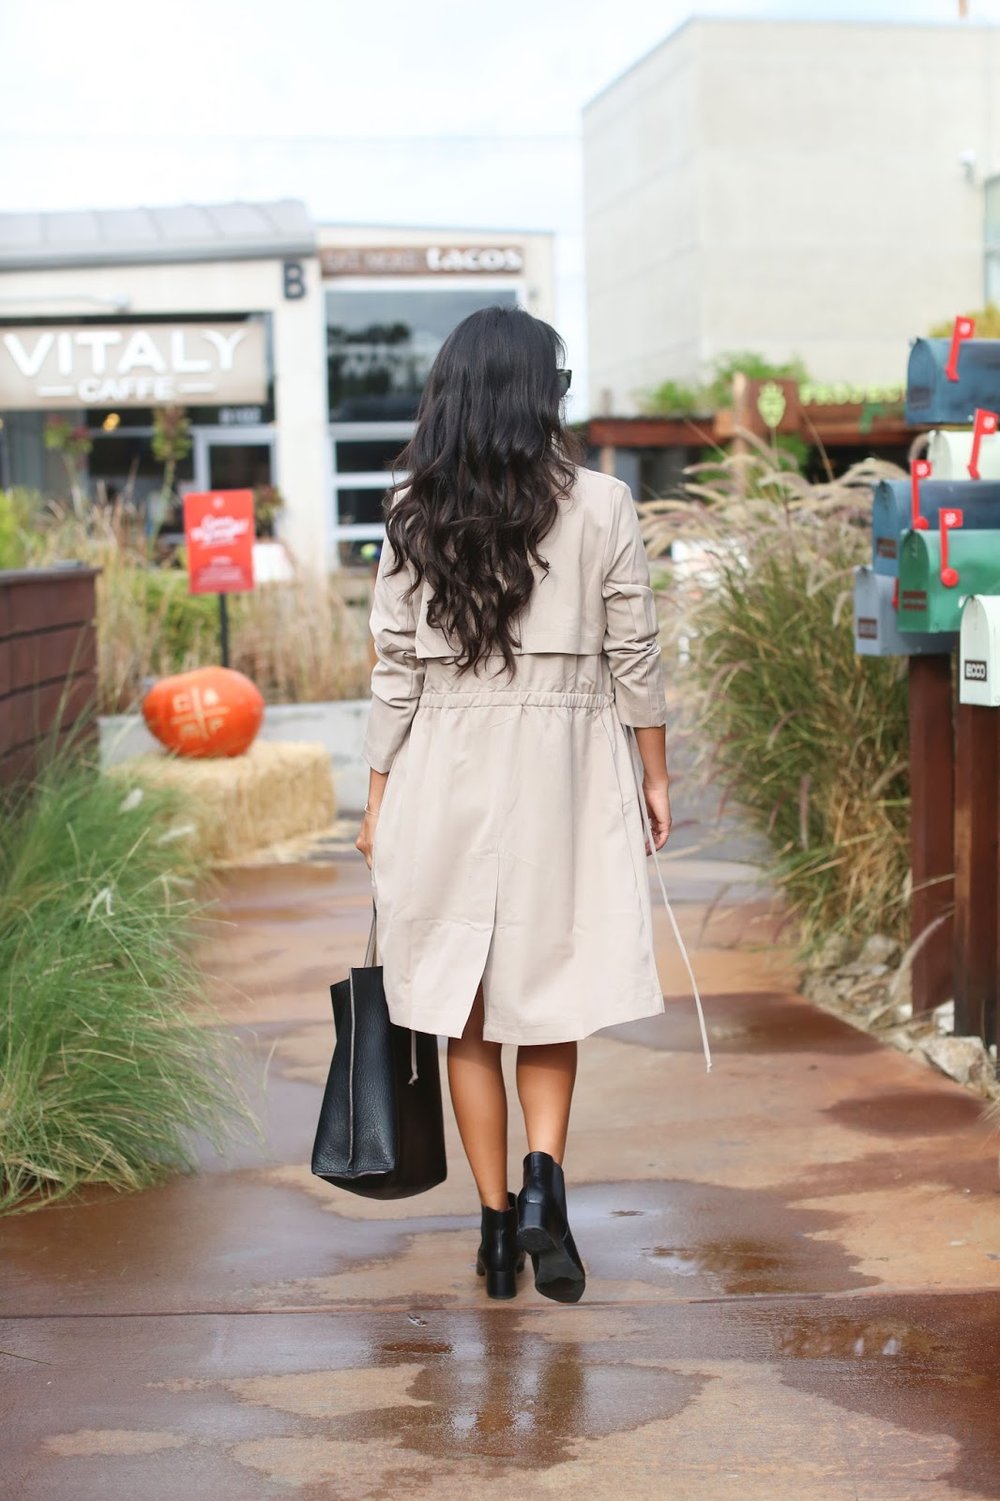 how to wear black booties to work, justfab clothes, trench coat styling